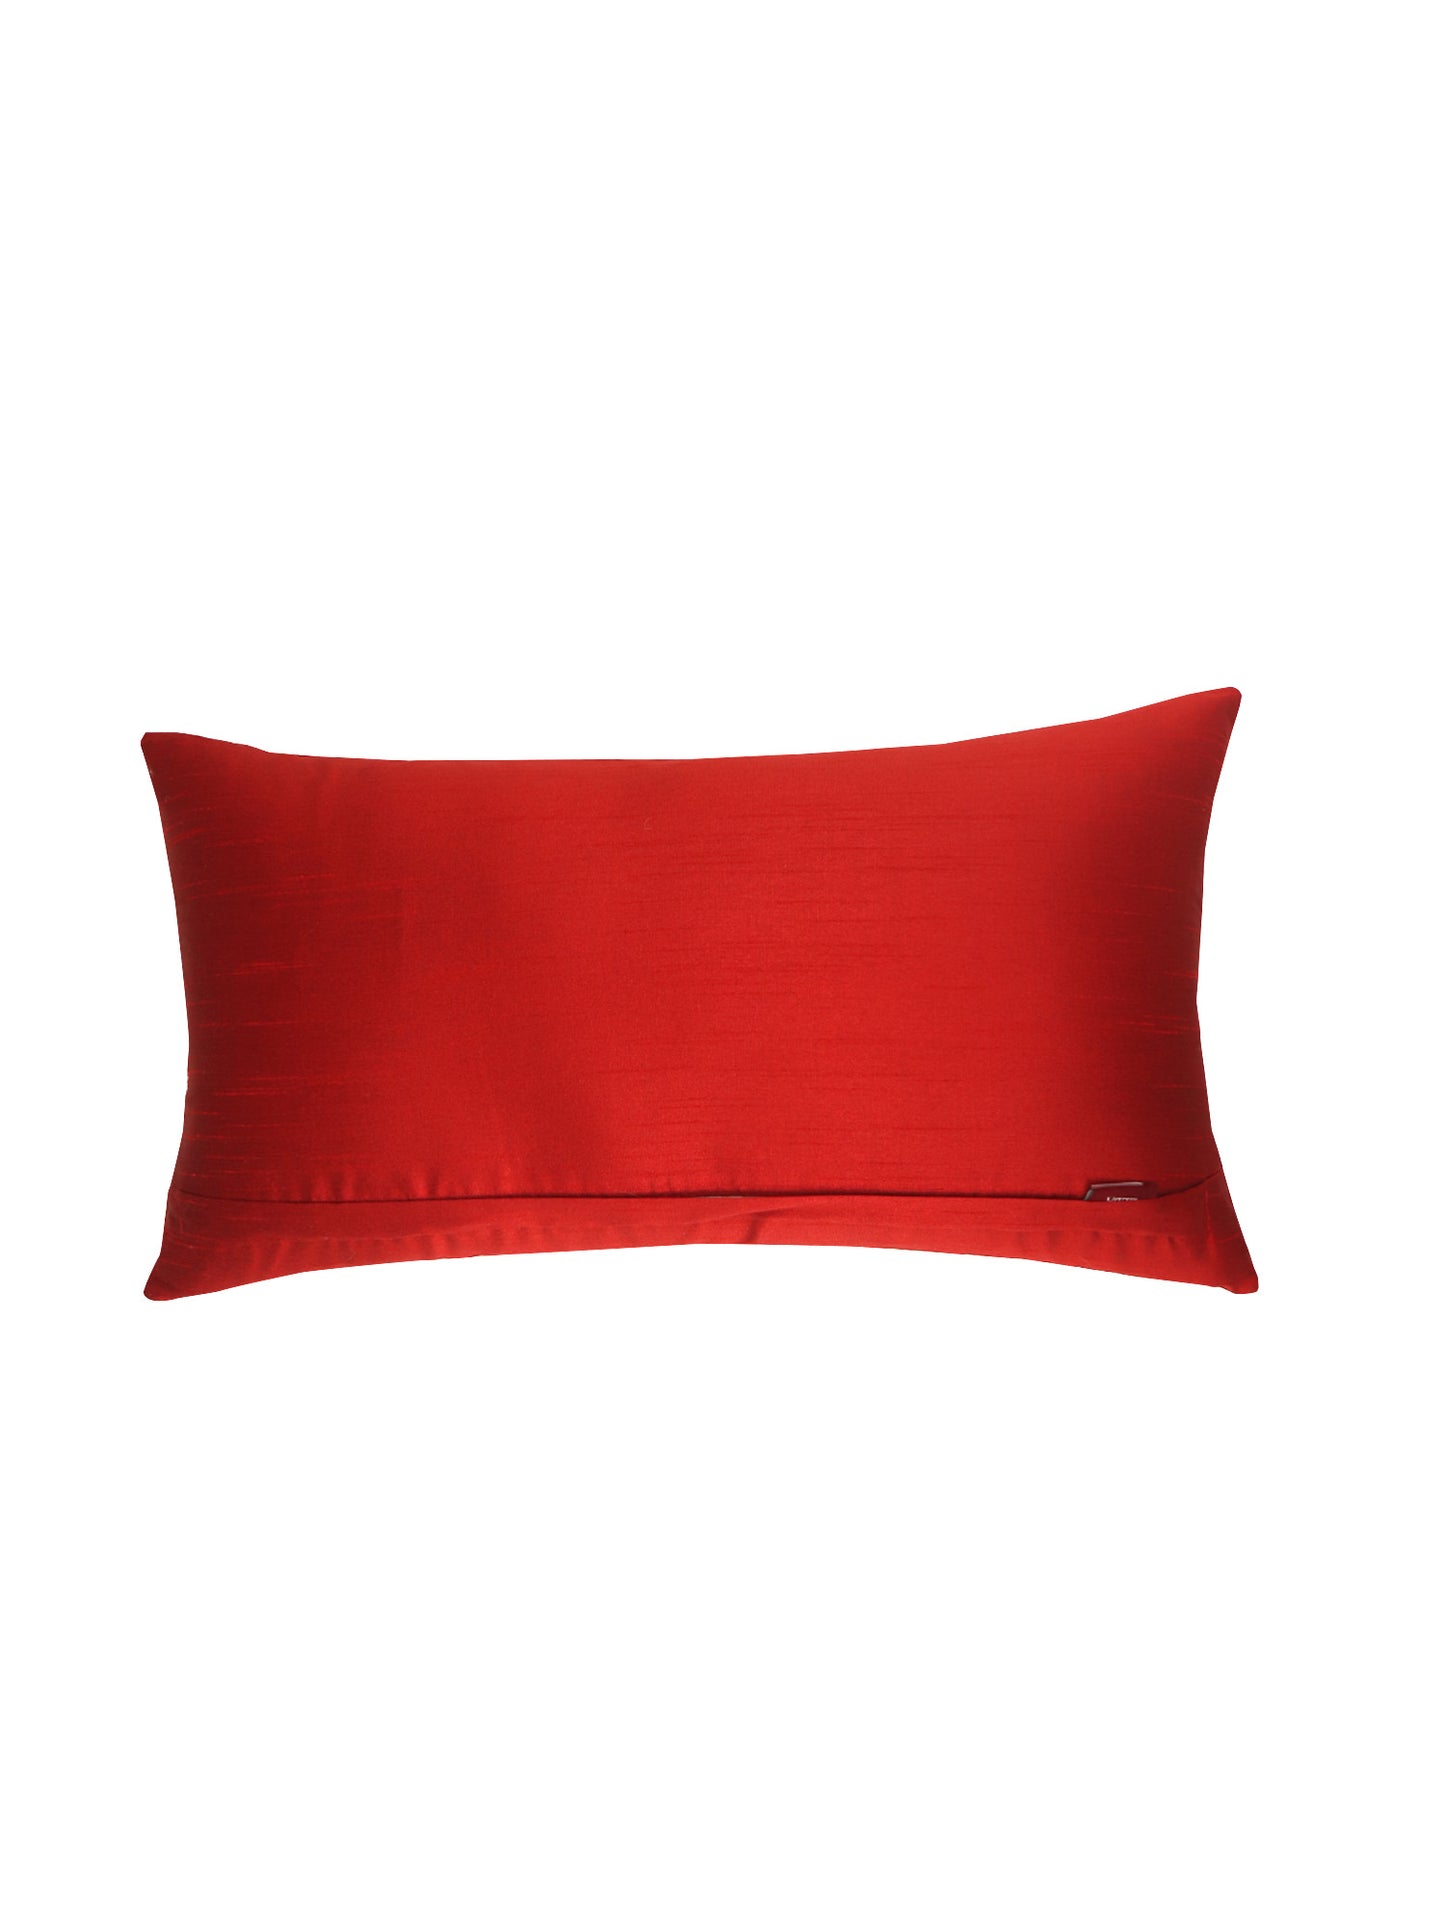 Line Embroidered Cushion Cover Polyester Blend Red - 12" x 22"